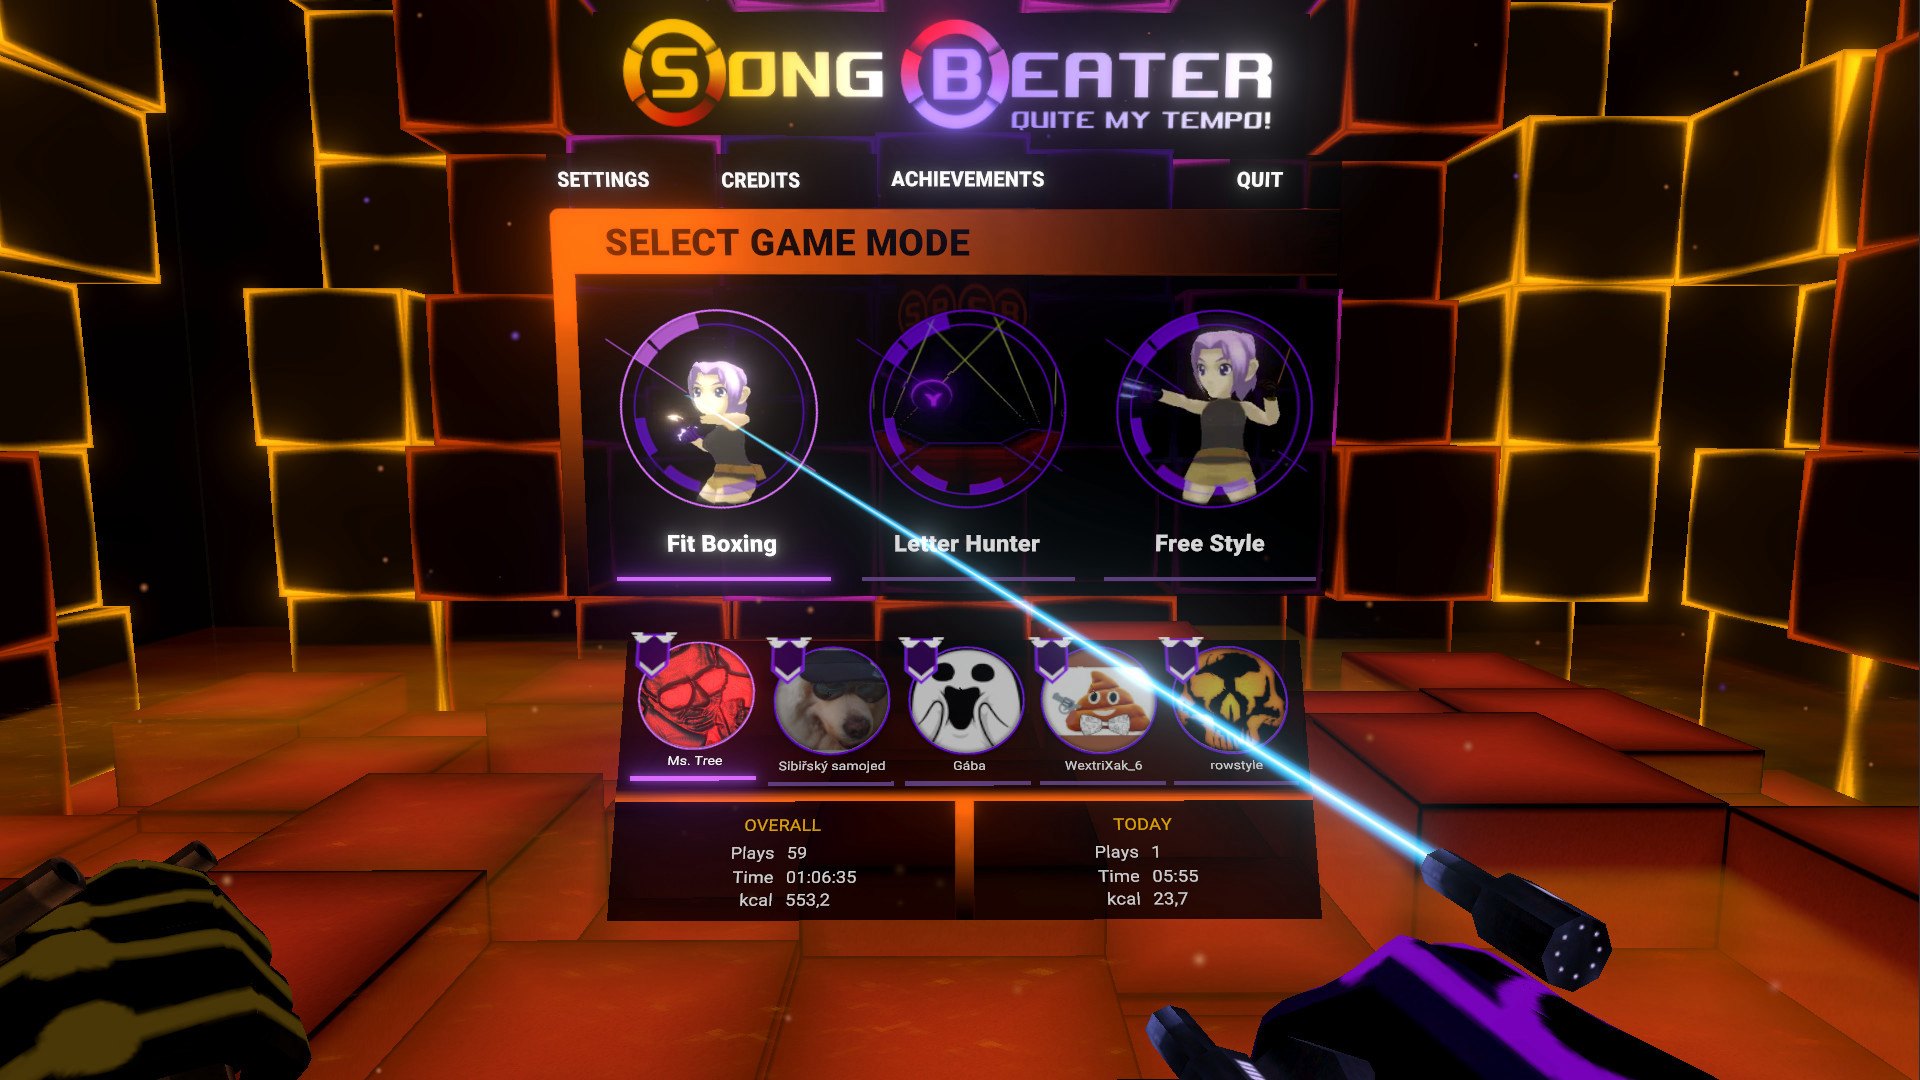 Song Beater: Quite My Tempo! Steam CD Key, $3.38